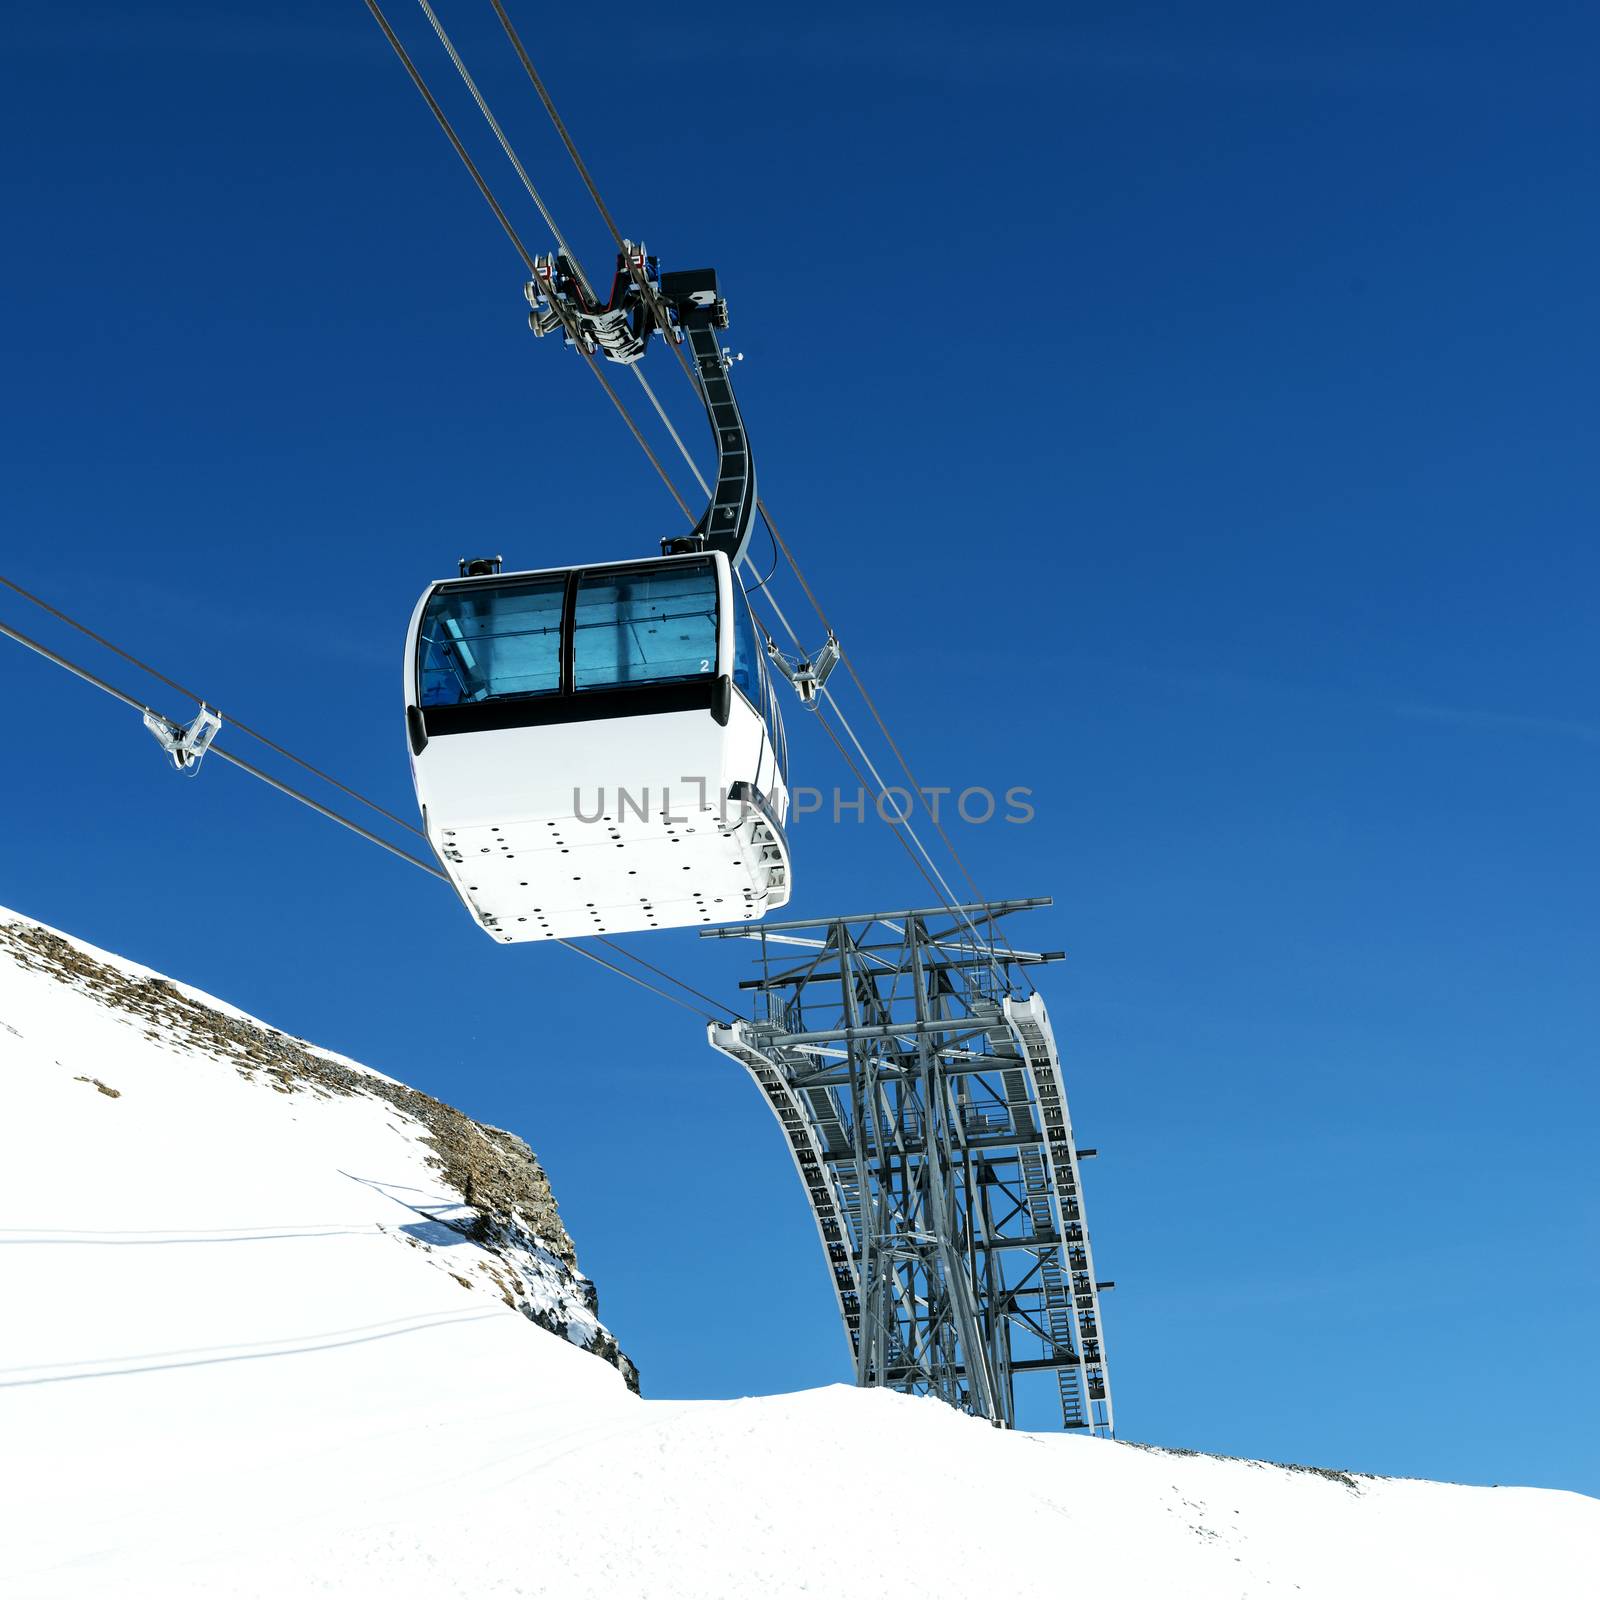 Cablecar to Val d'Isere, Alps in winter, Tarentaise, France